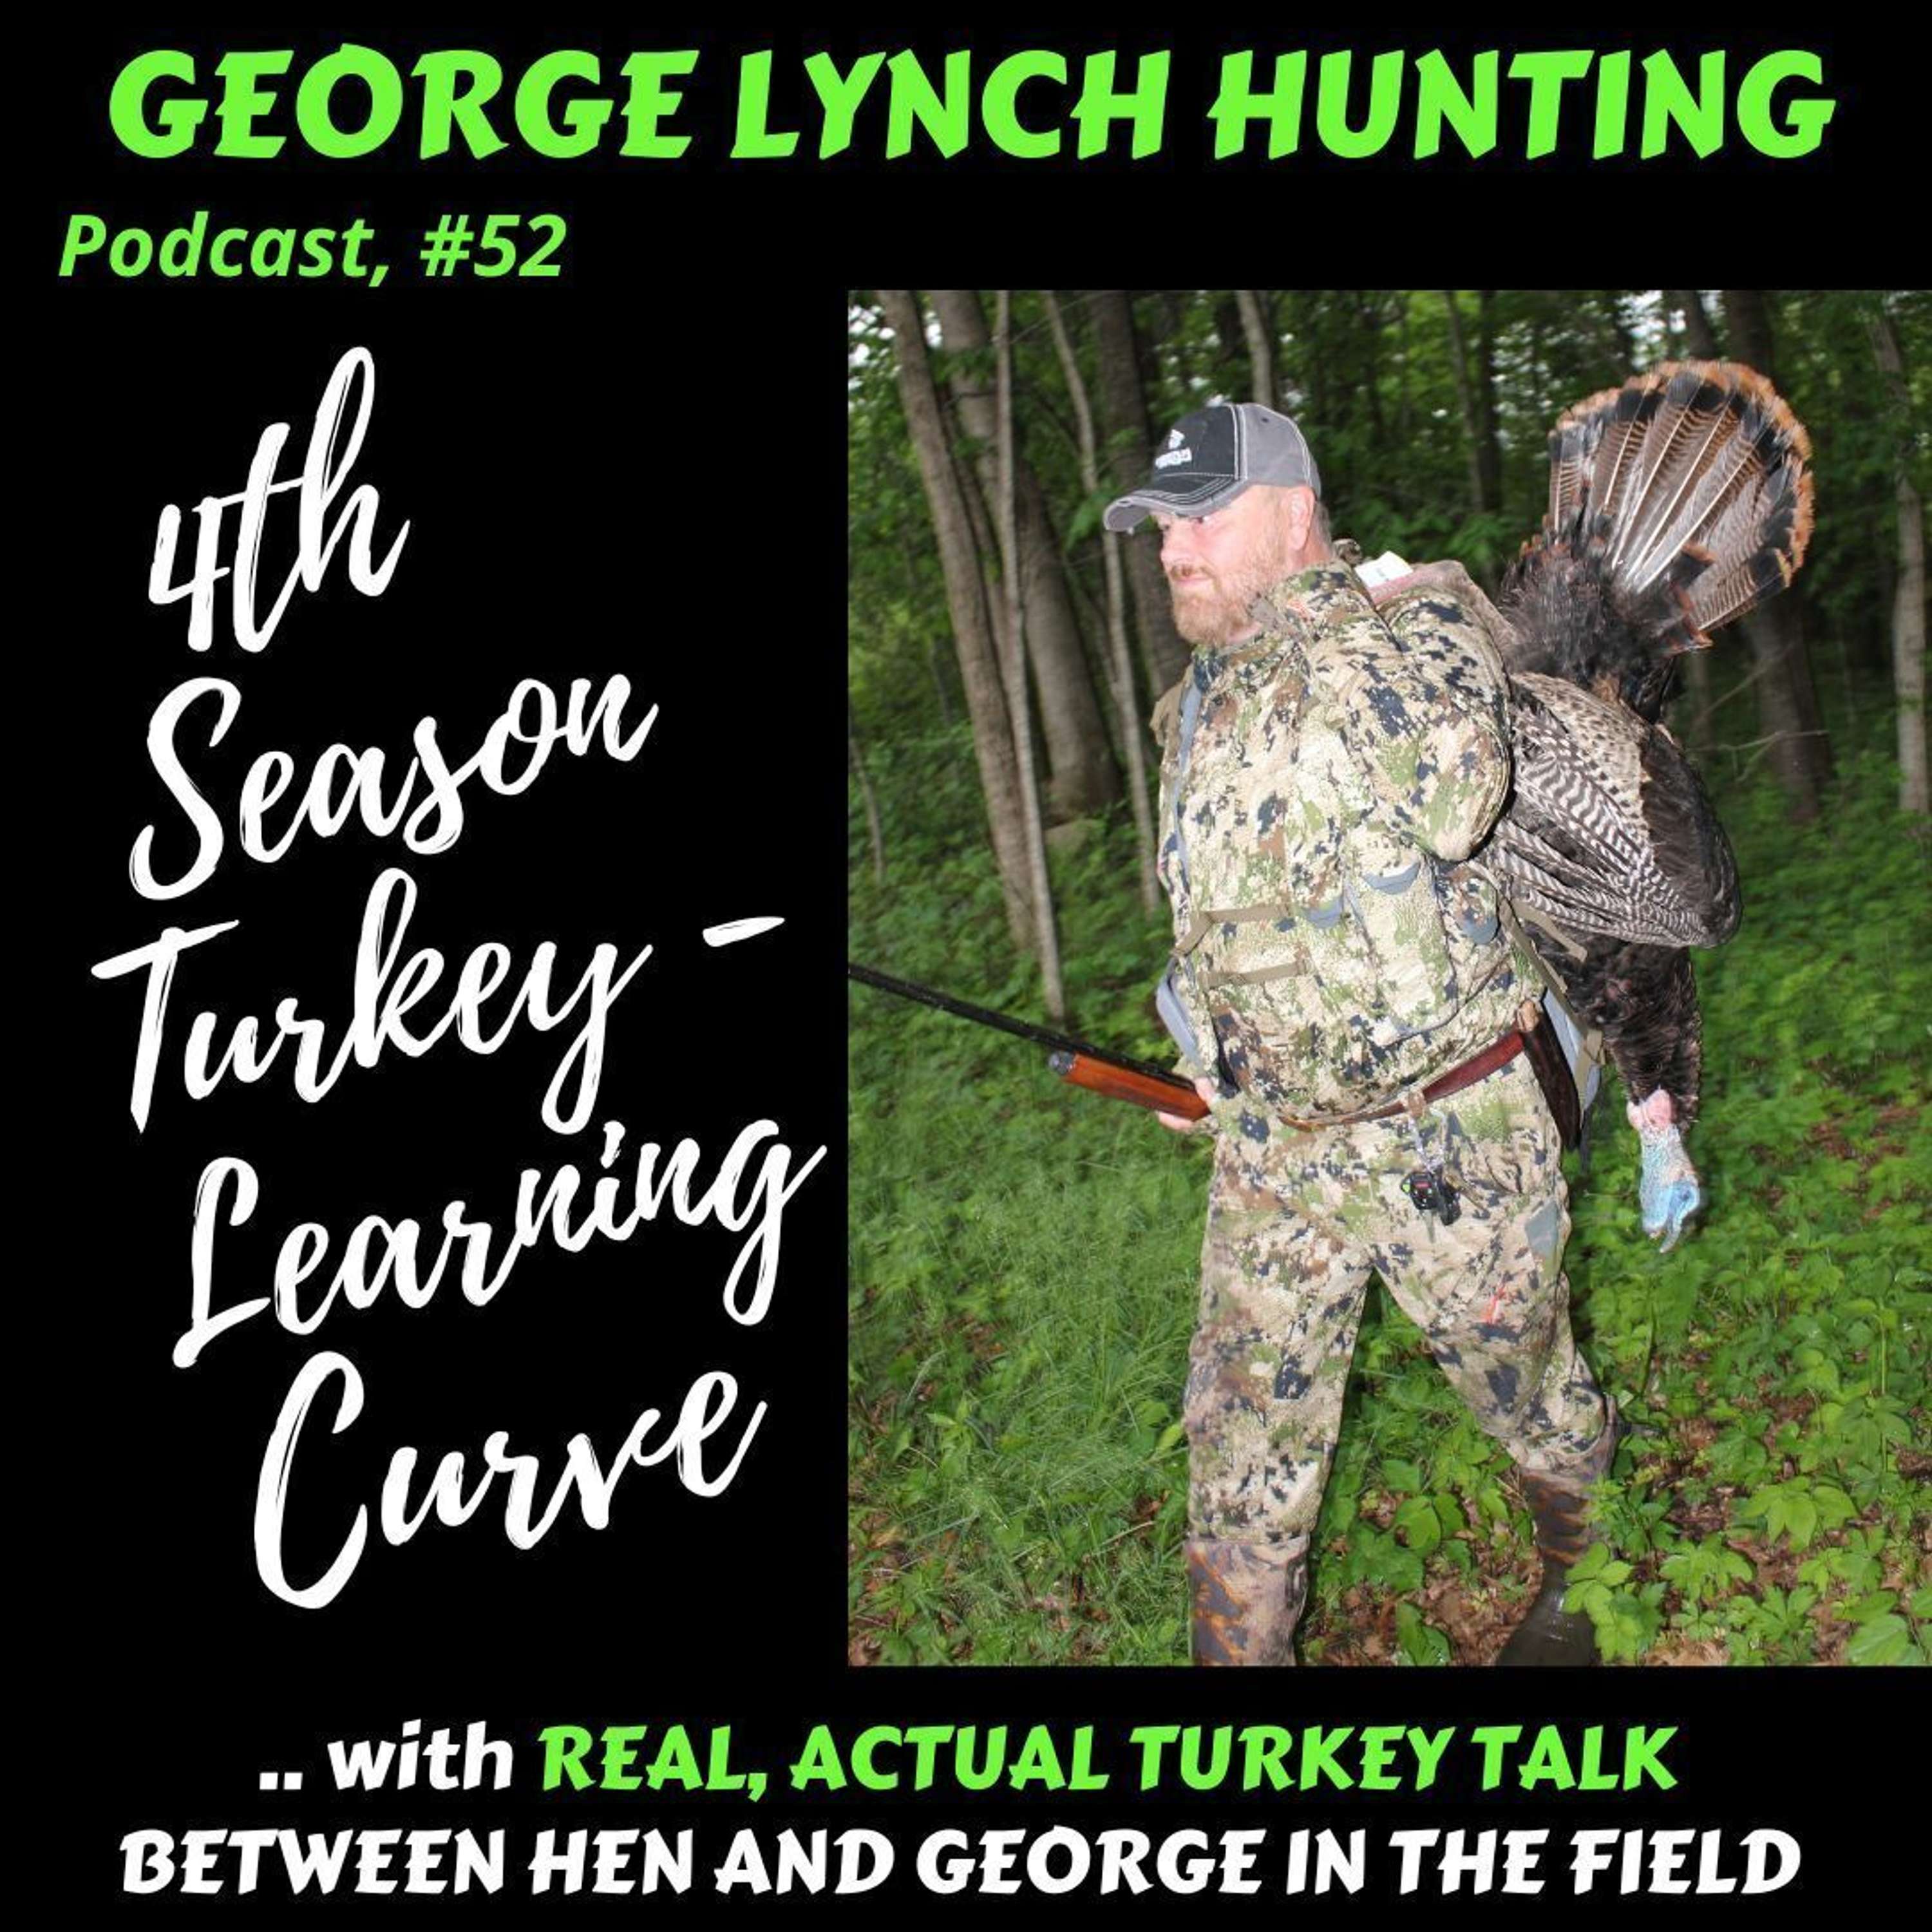 4th SEASON TURKEY - LEARNING CURVE with REAR, ACTUAL TURKEY TALK between HEN and GEORGE LYNCH